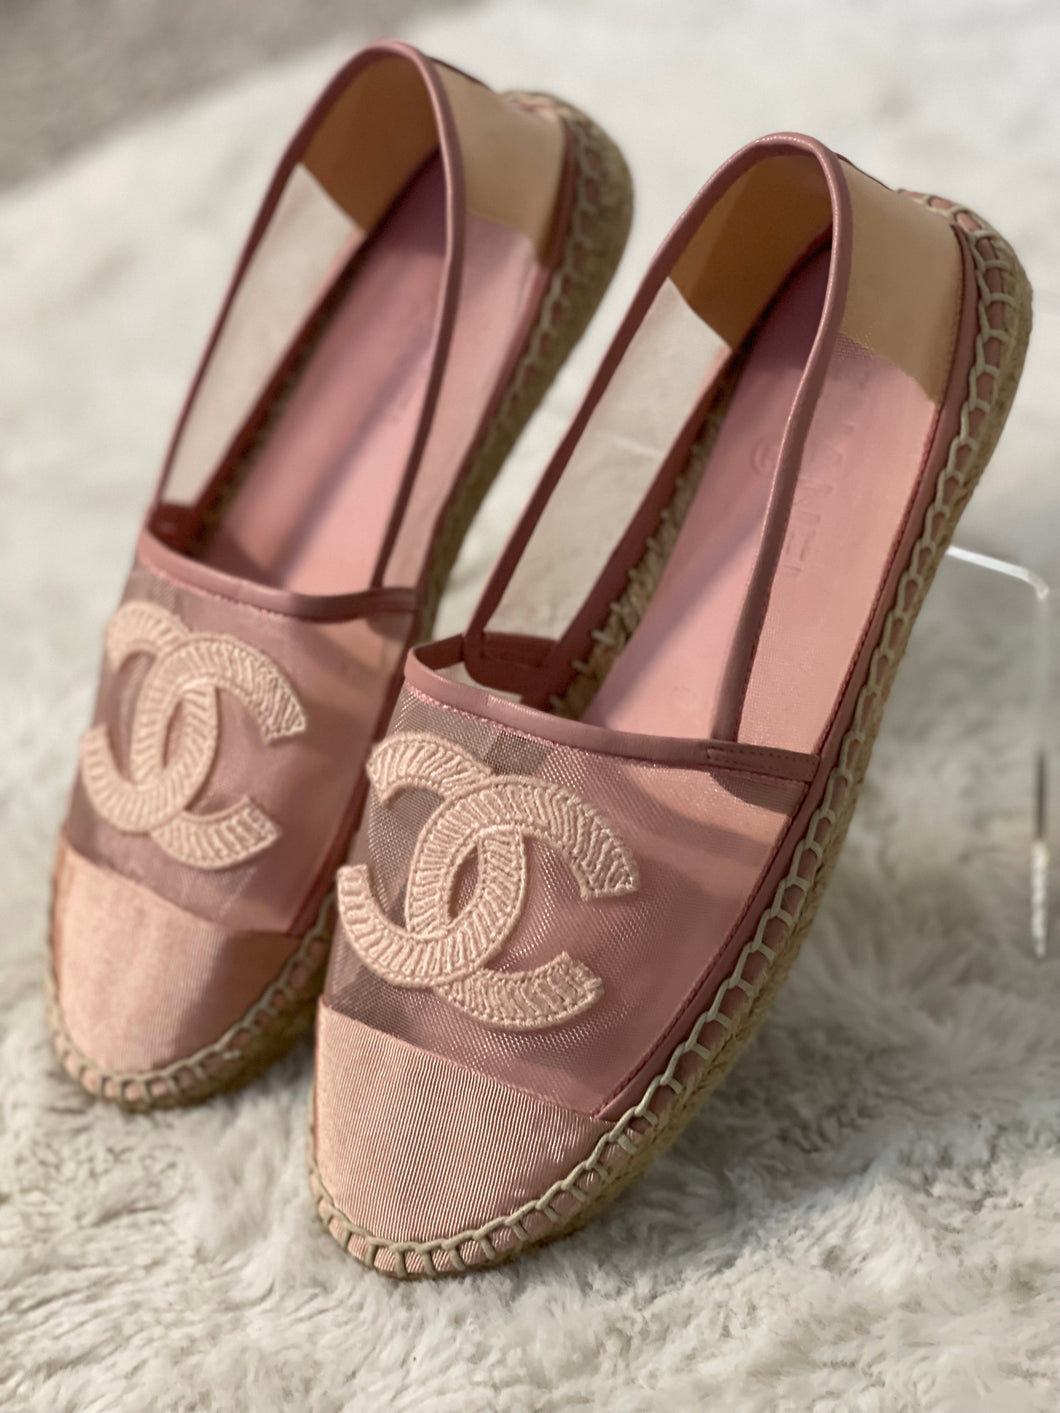 Chanel Pink Mesh Espadrilles from 19S collection size EU 39